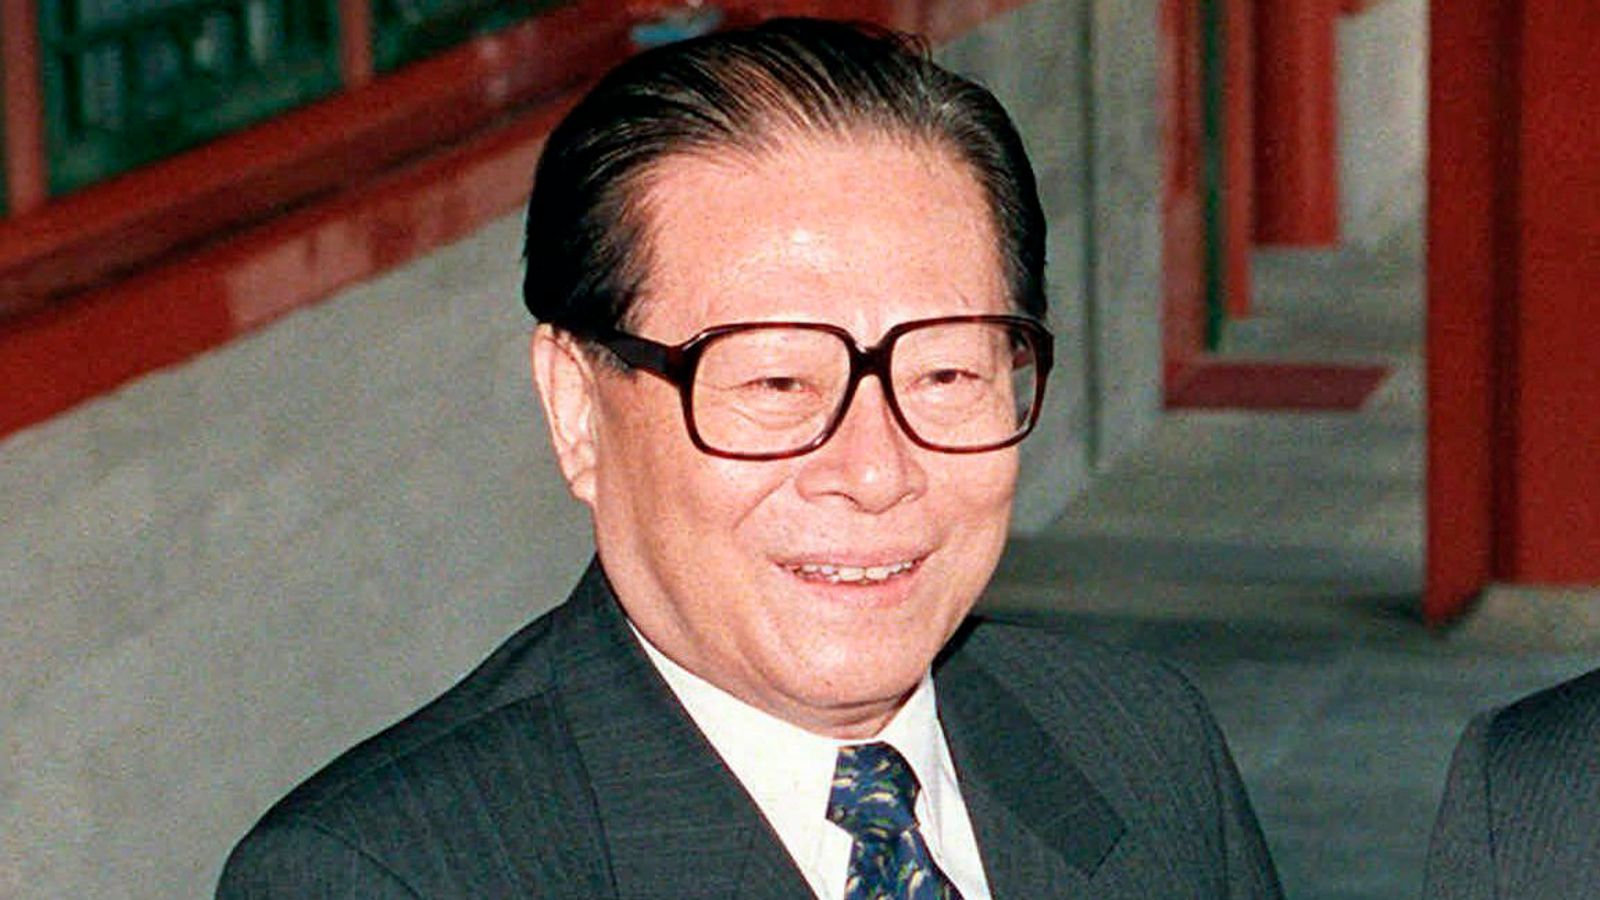 Former Chinese president who came to power after Tiananmen protests dies aged 96 